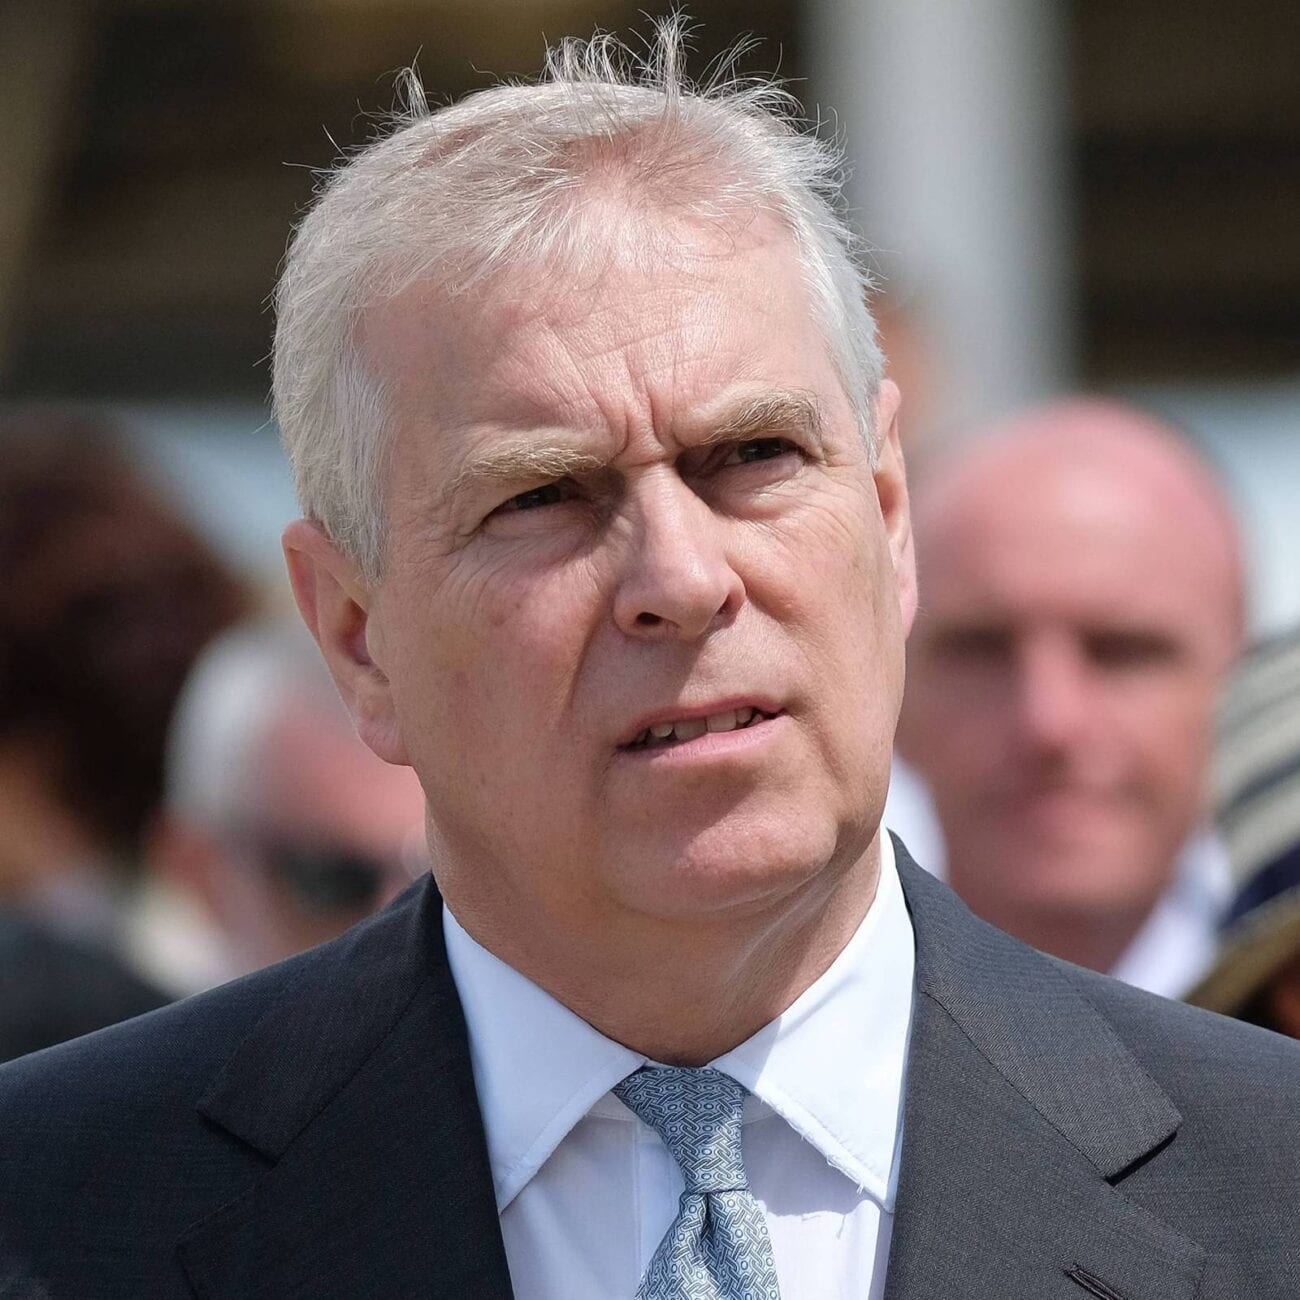 Netflix’s drama 'The Crown' has rekindled the world’s fascination with the royal family. Is season 4 entirely accurate about Prince Andrew?